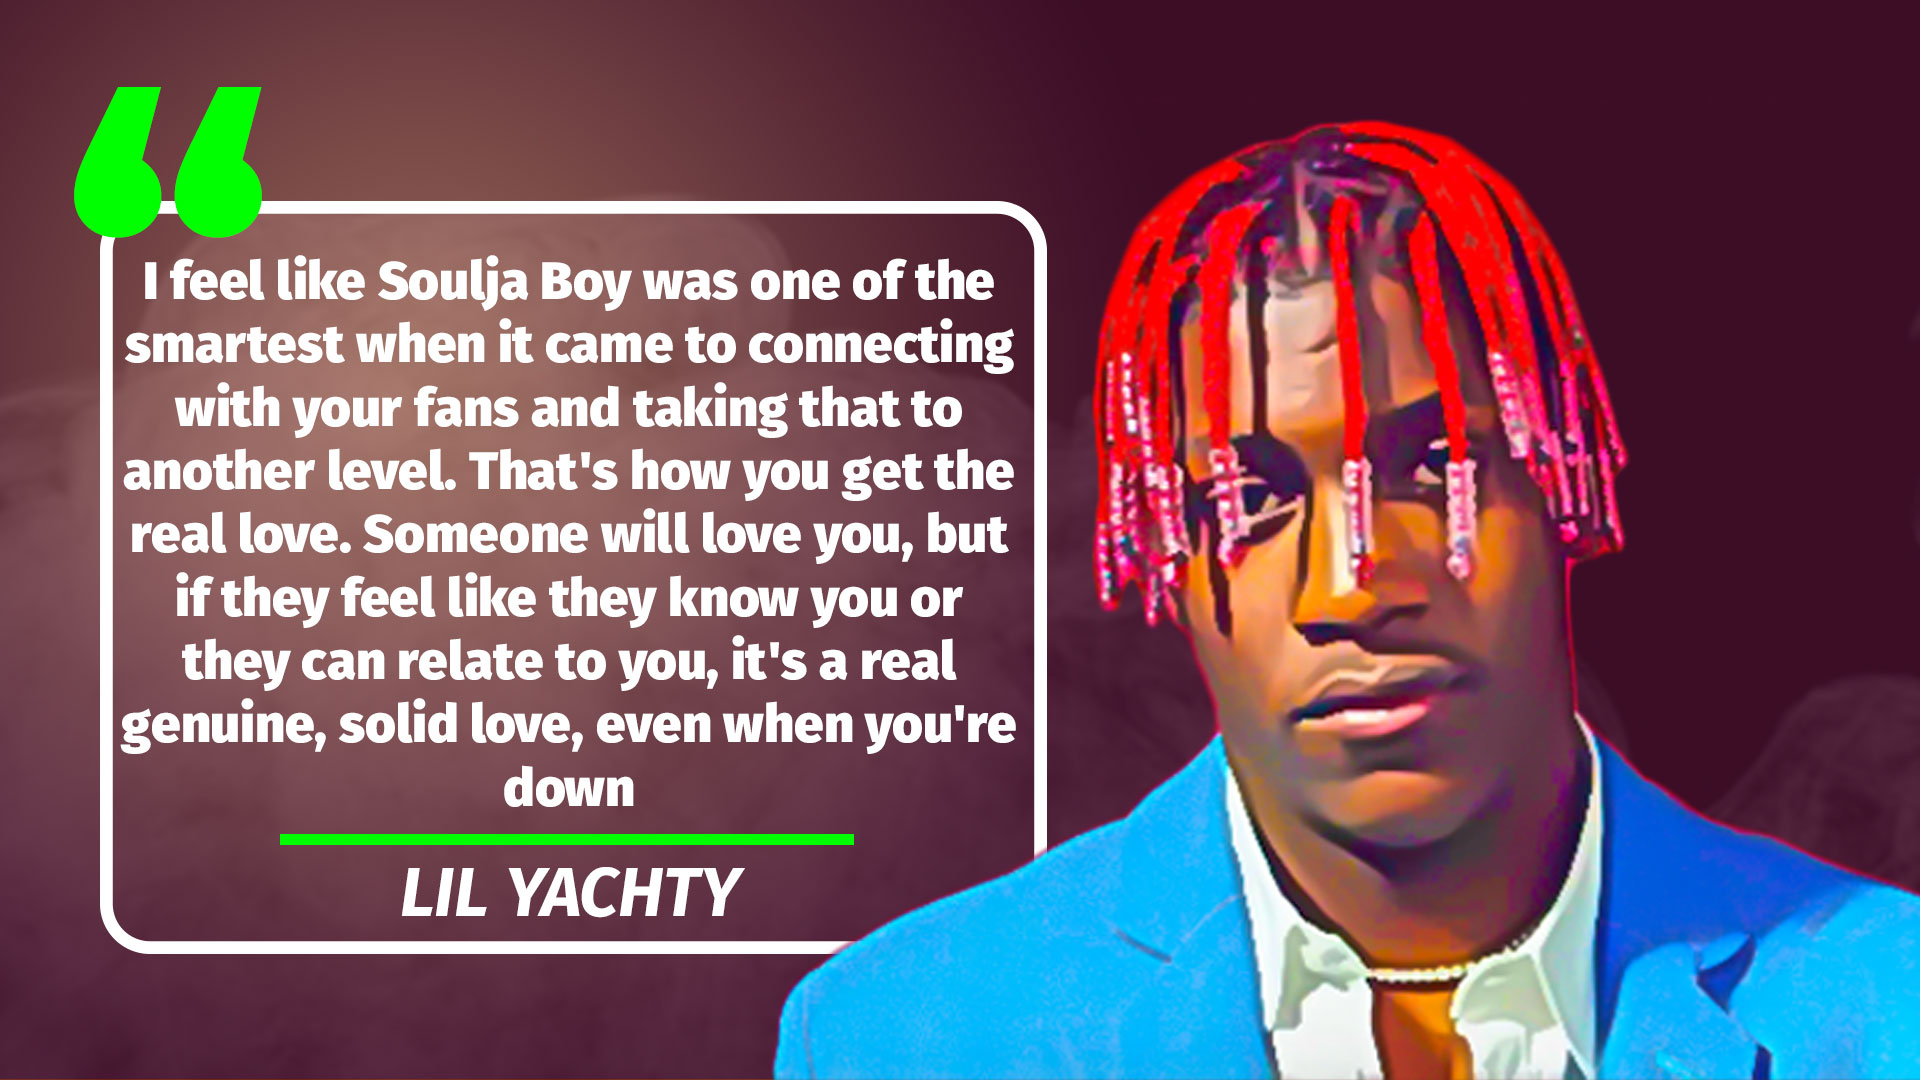 LIL-YACHTY-QUOTE-3